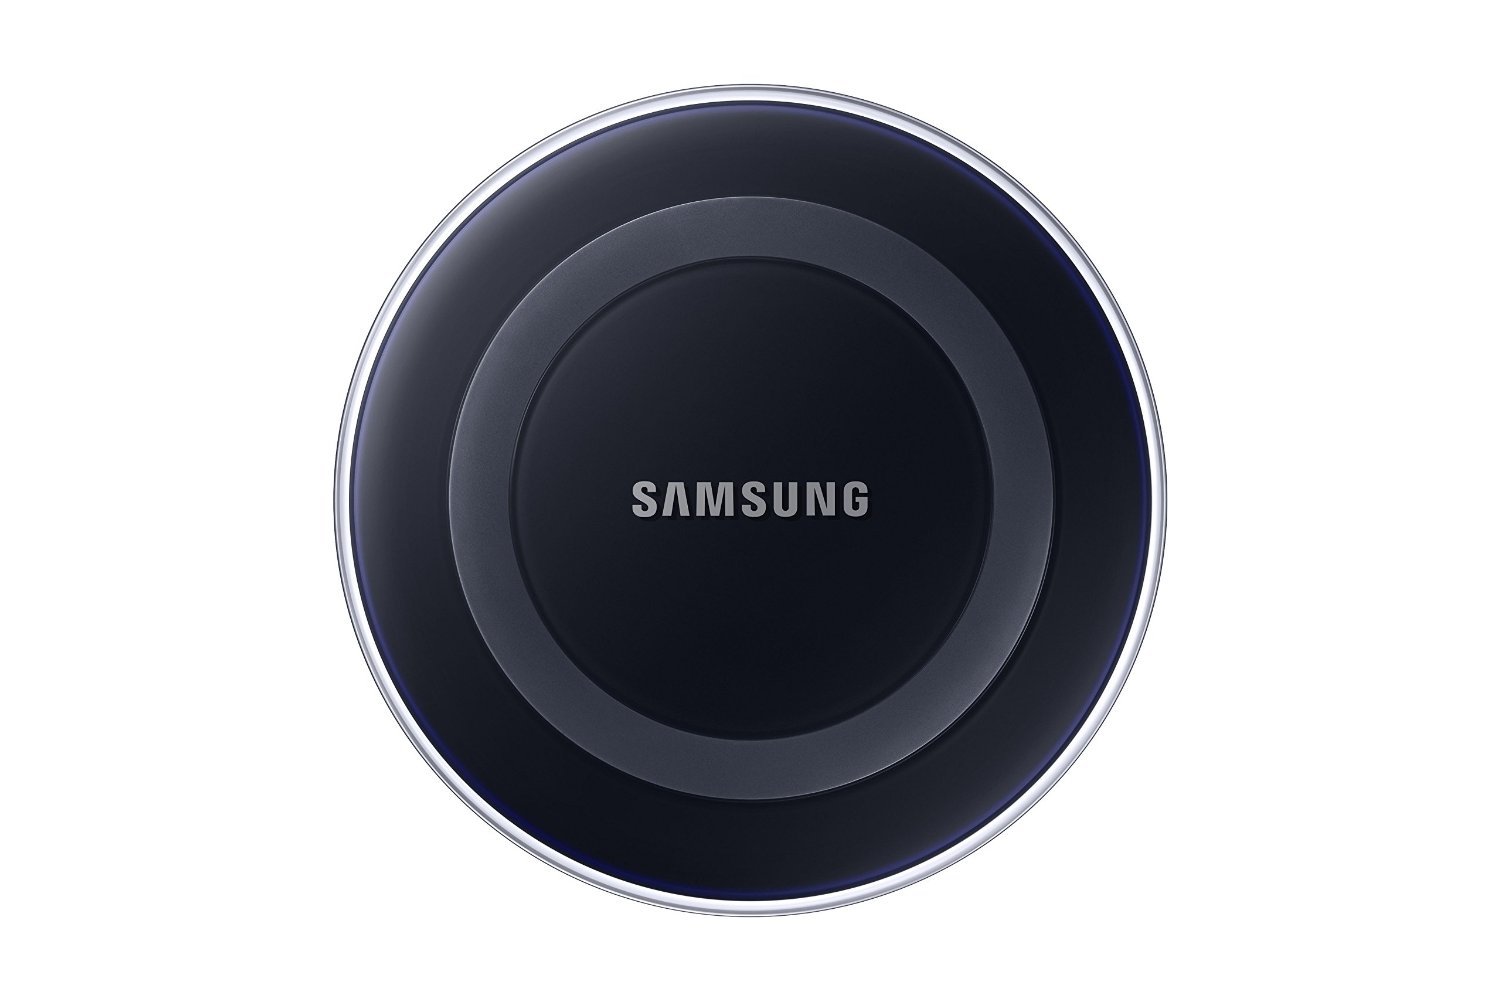 Samsung Qi Certified Wireless Charging Pad with 2A Wall Charger- Supports charging on Qi compatible smartphones including the Samsung Galaxy S8, S8+, Note 8, Apple iPhone 8, iPhone 8 Plus, and iPhone X (US Version) - Black Sapphire